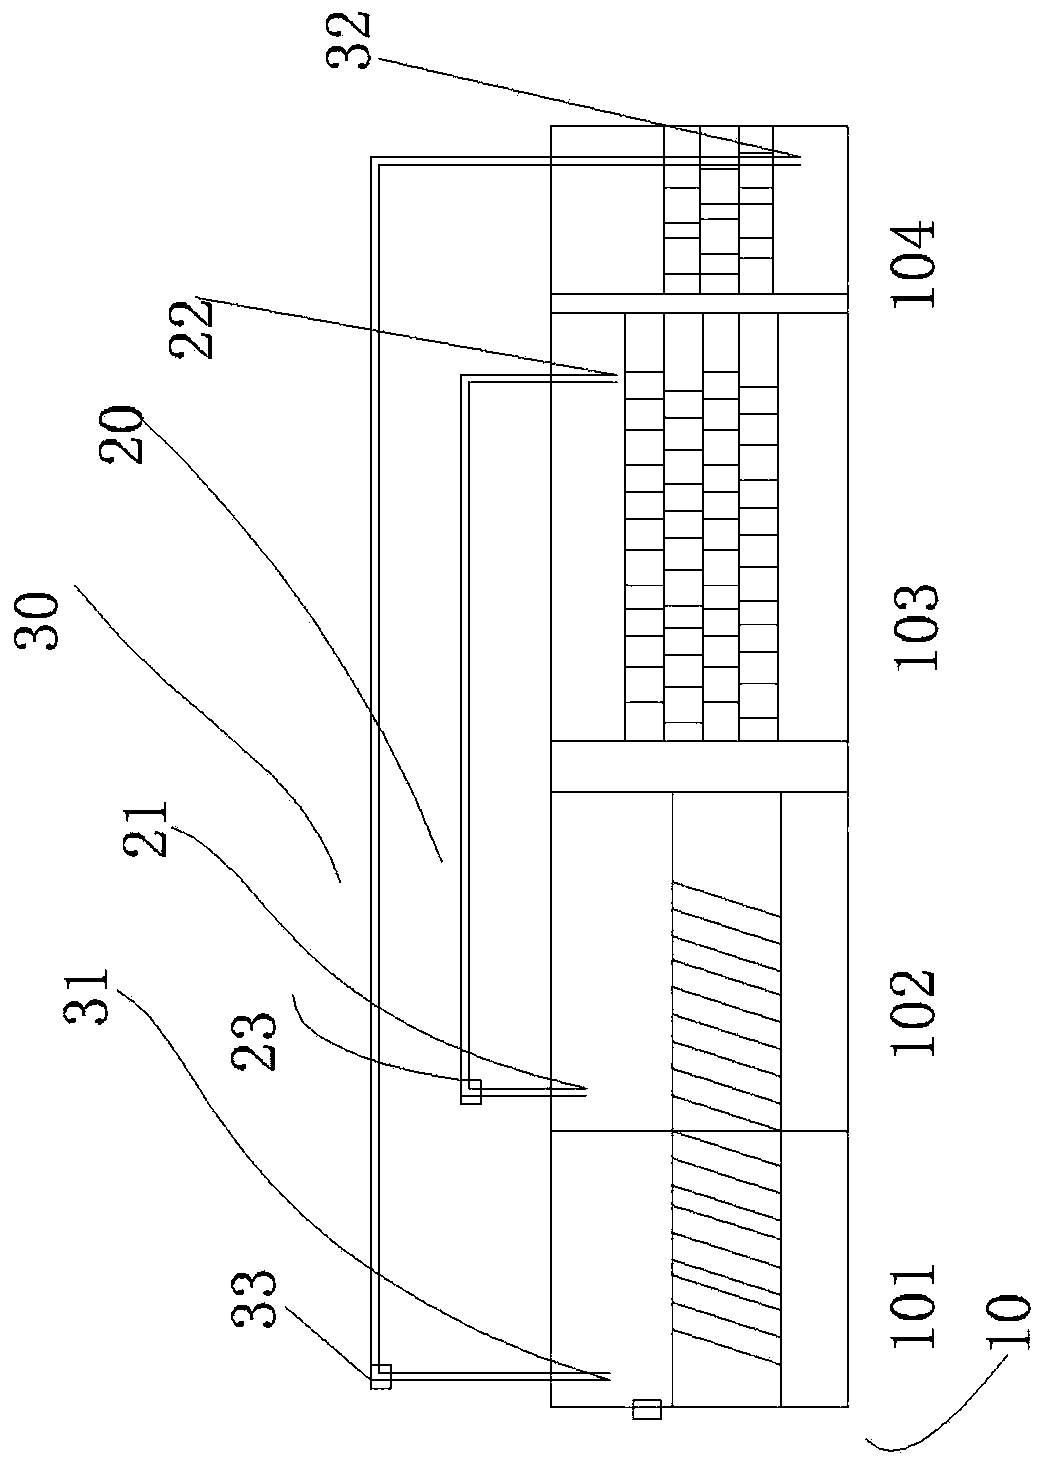 A high-salt sewage treatment system and its tank capacity and aeration adjustment method